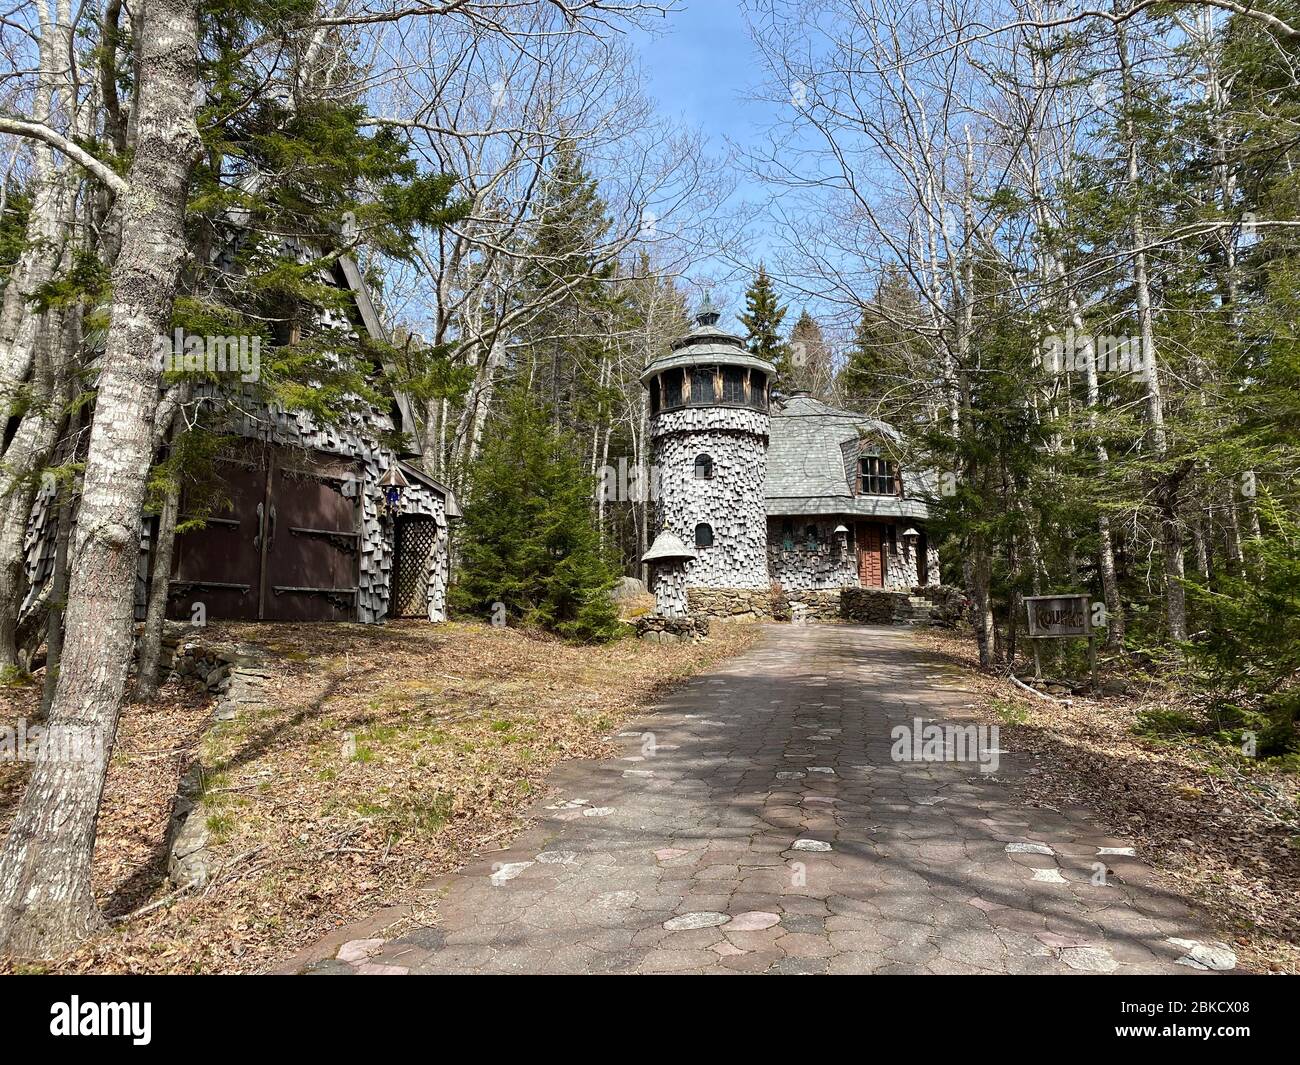 This photo, taken in April of 2020, shows the “Mushroom House” in East Boothbay, Maine. The house was designed and built in 1998 by David Lee.  Lee has built 25 Middle Earth style homes from scratch, by himself, since 1975. Stock Photo